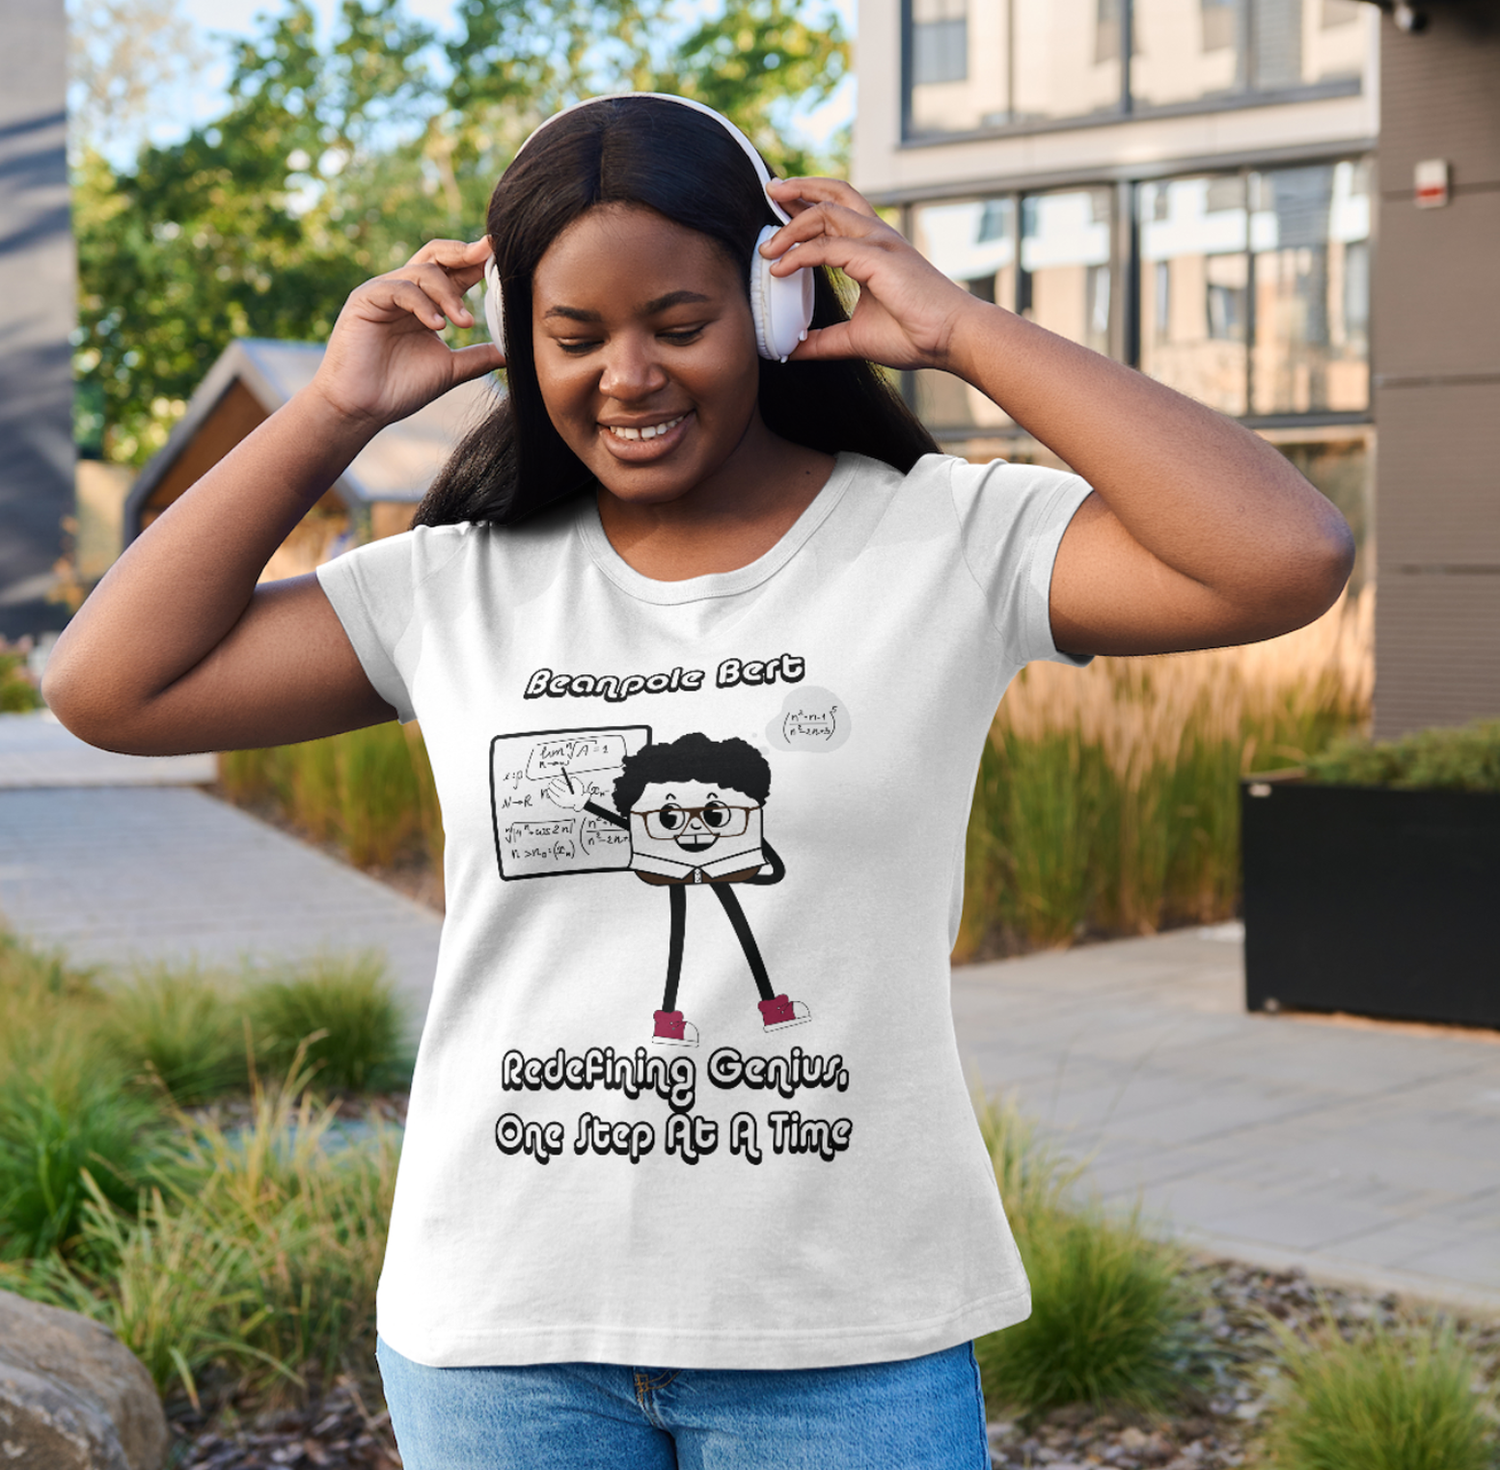 Women's t-shirts featuring our adorable Embrace Your Uniqueness characters